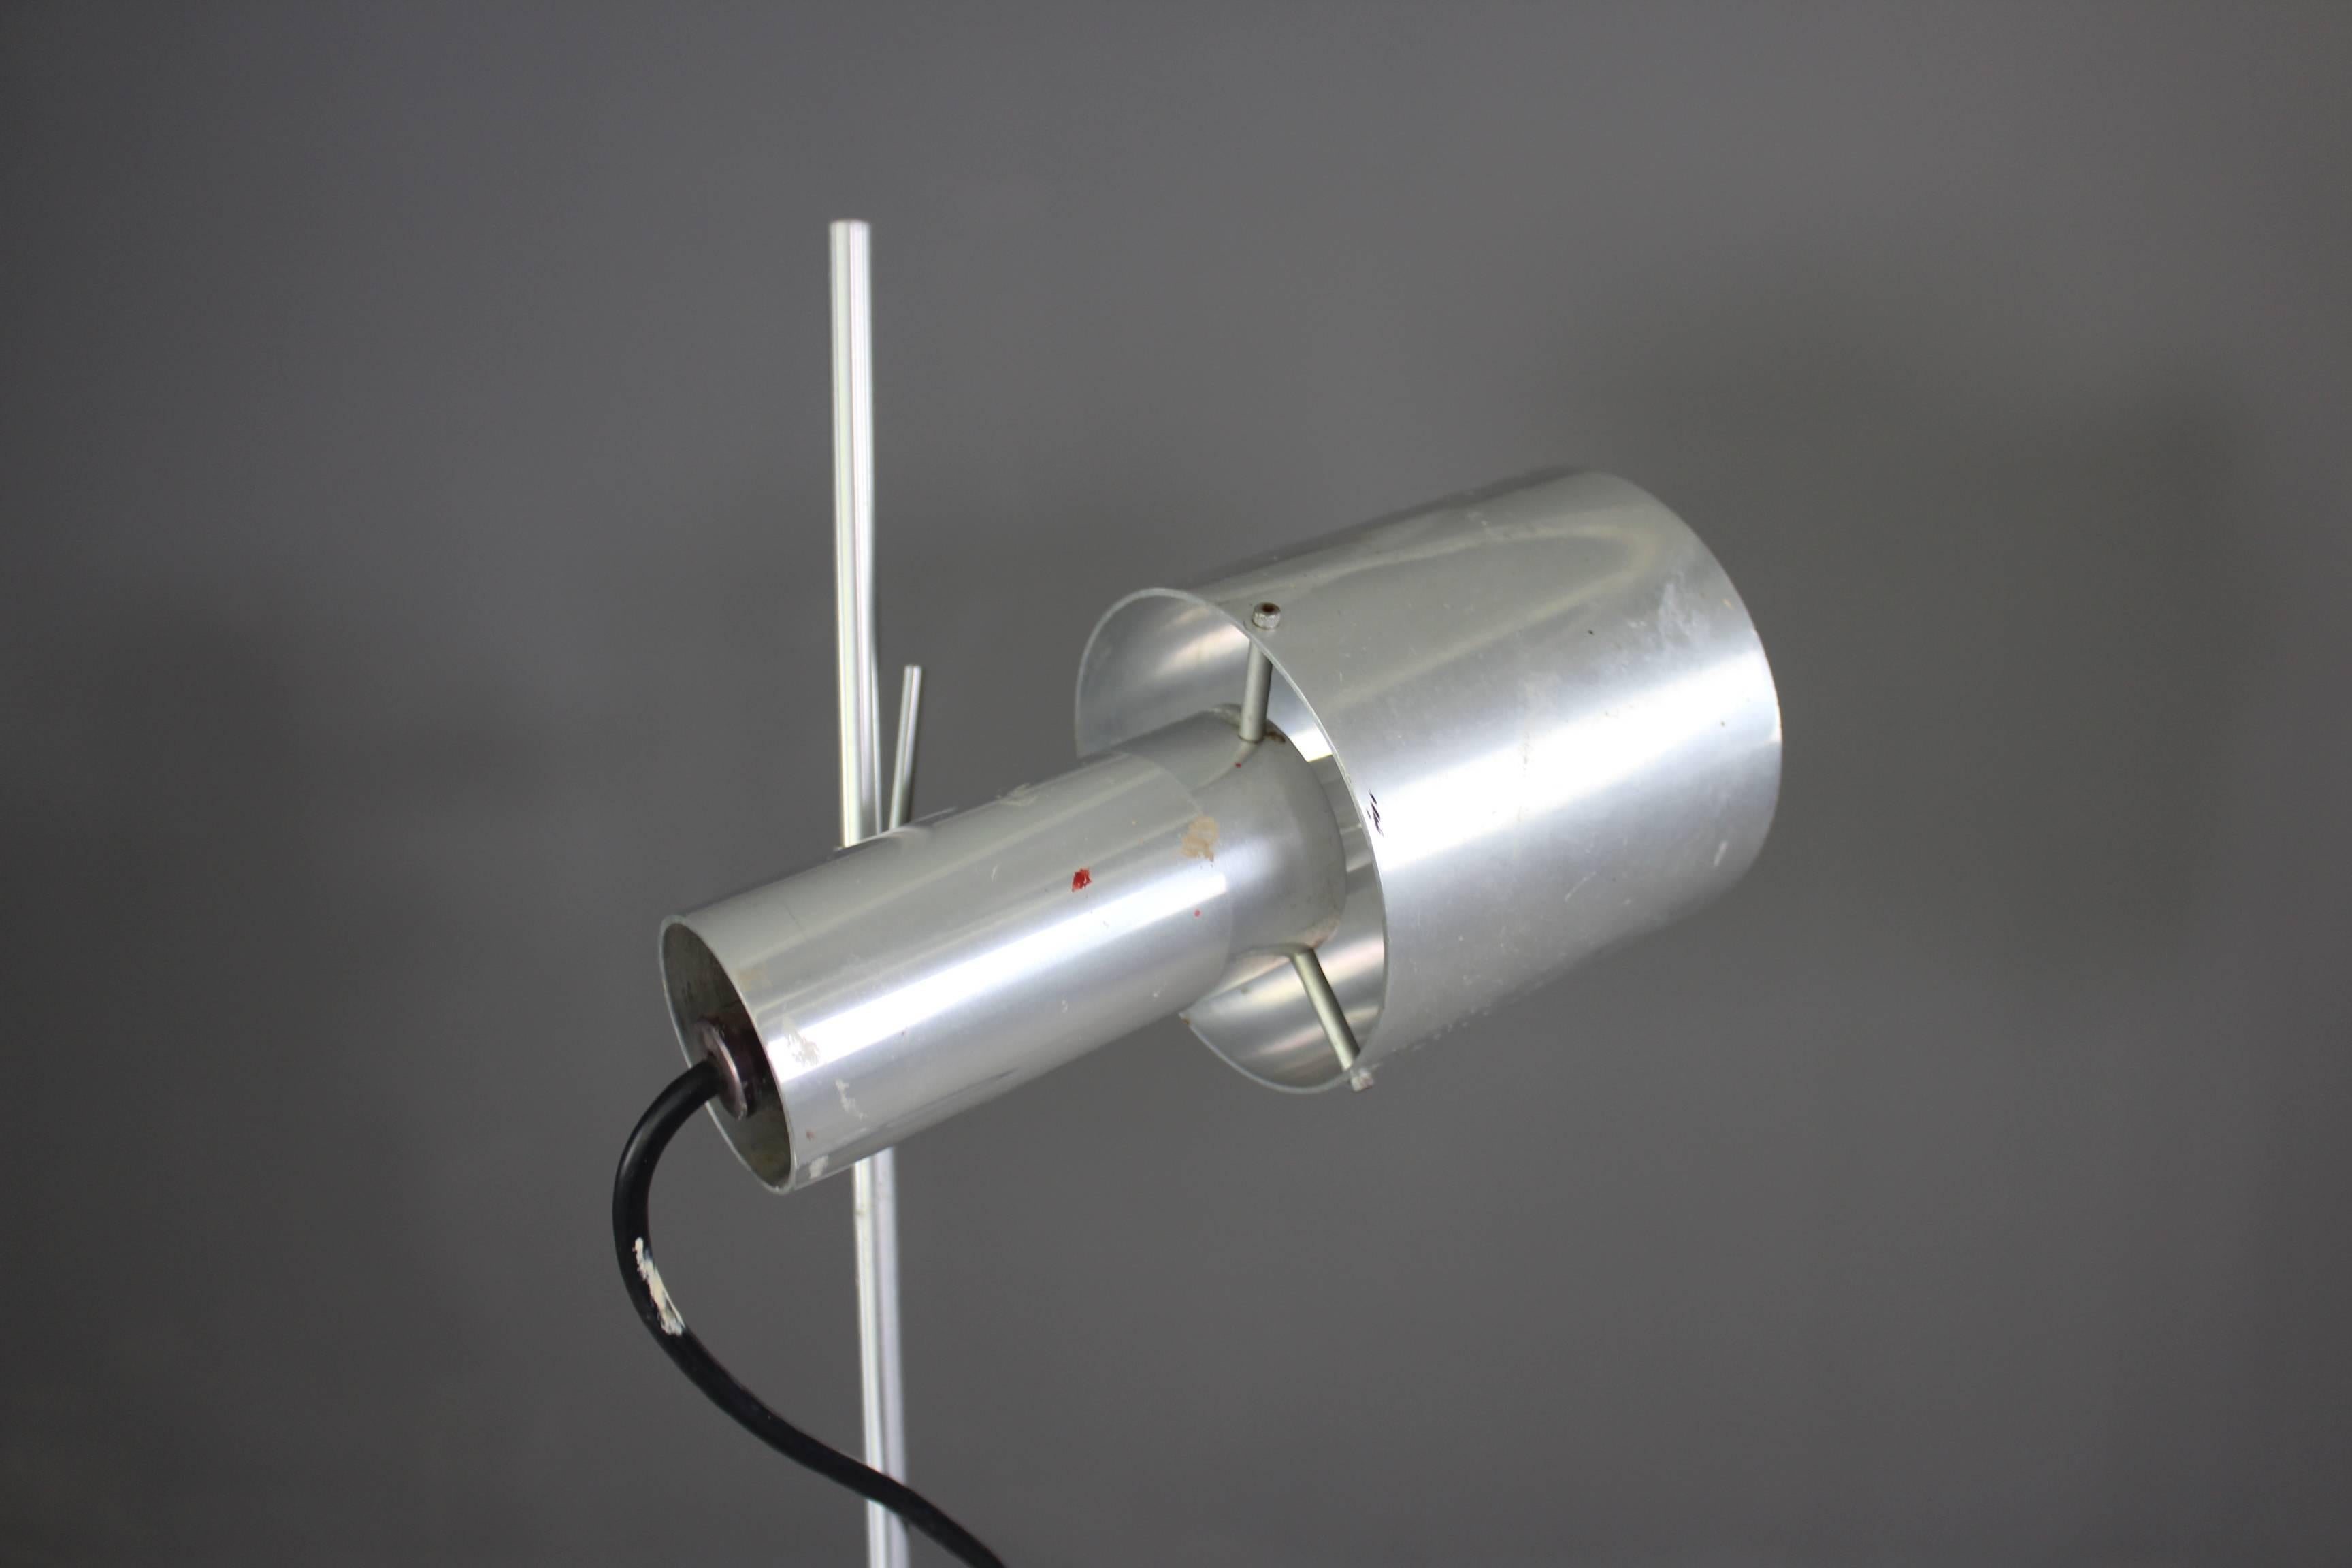 Aluminium floor lamp by Peter Nelson for Architectural lighting. Round base with pair of adjustable aluminium spot lights. Nelson aluminium lights have a modernist design with technical appearance.

Please click our logo for more items, and to see